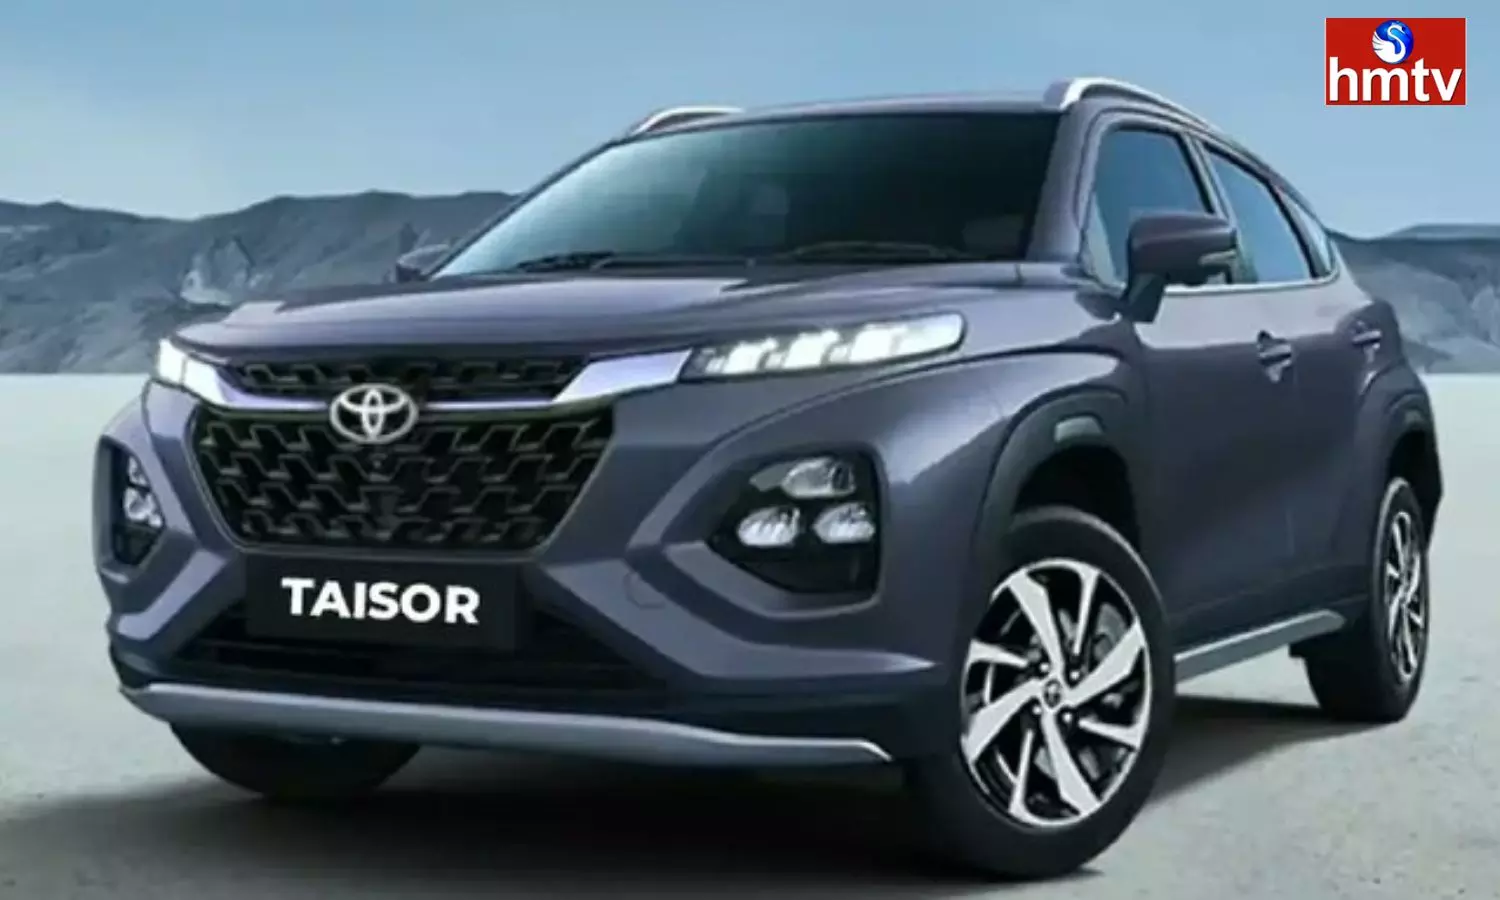 Toyota taisor to be unveiled in India Check price and features